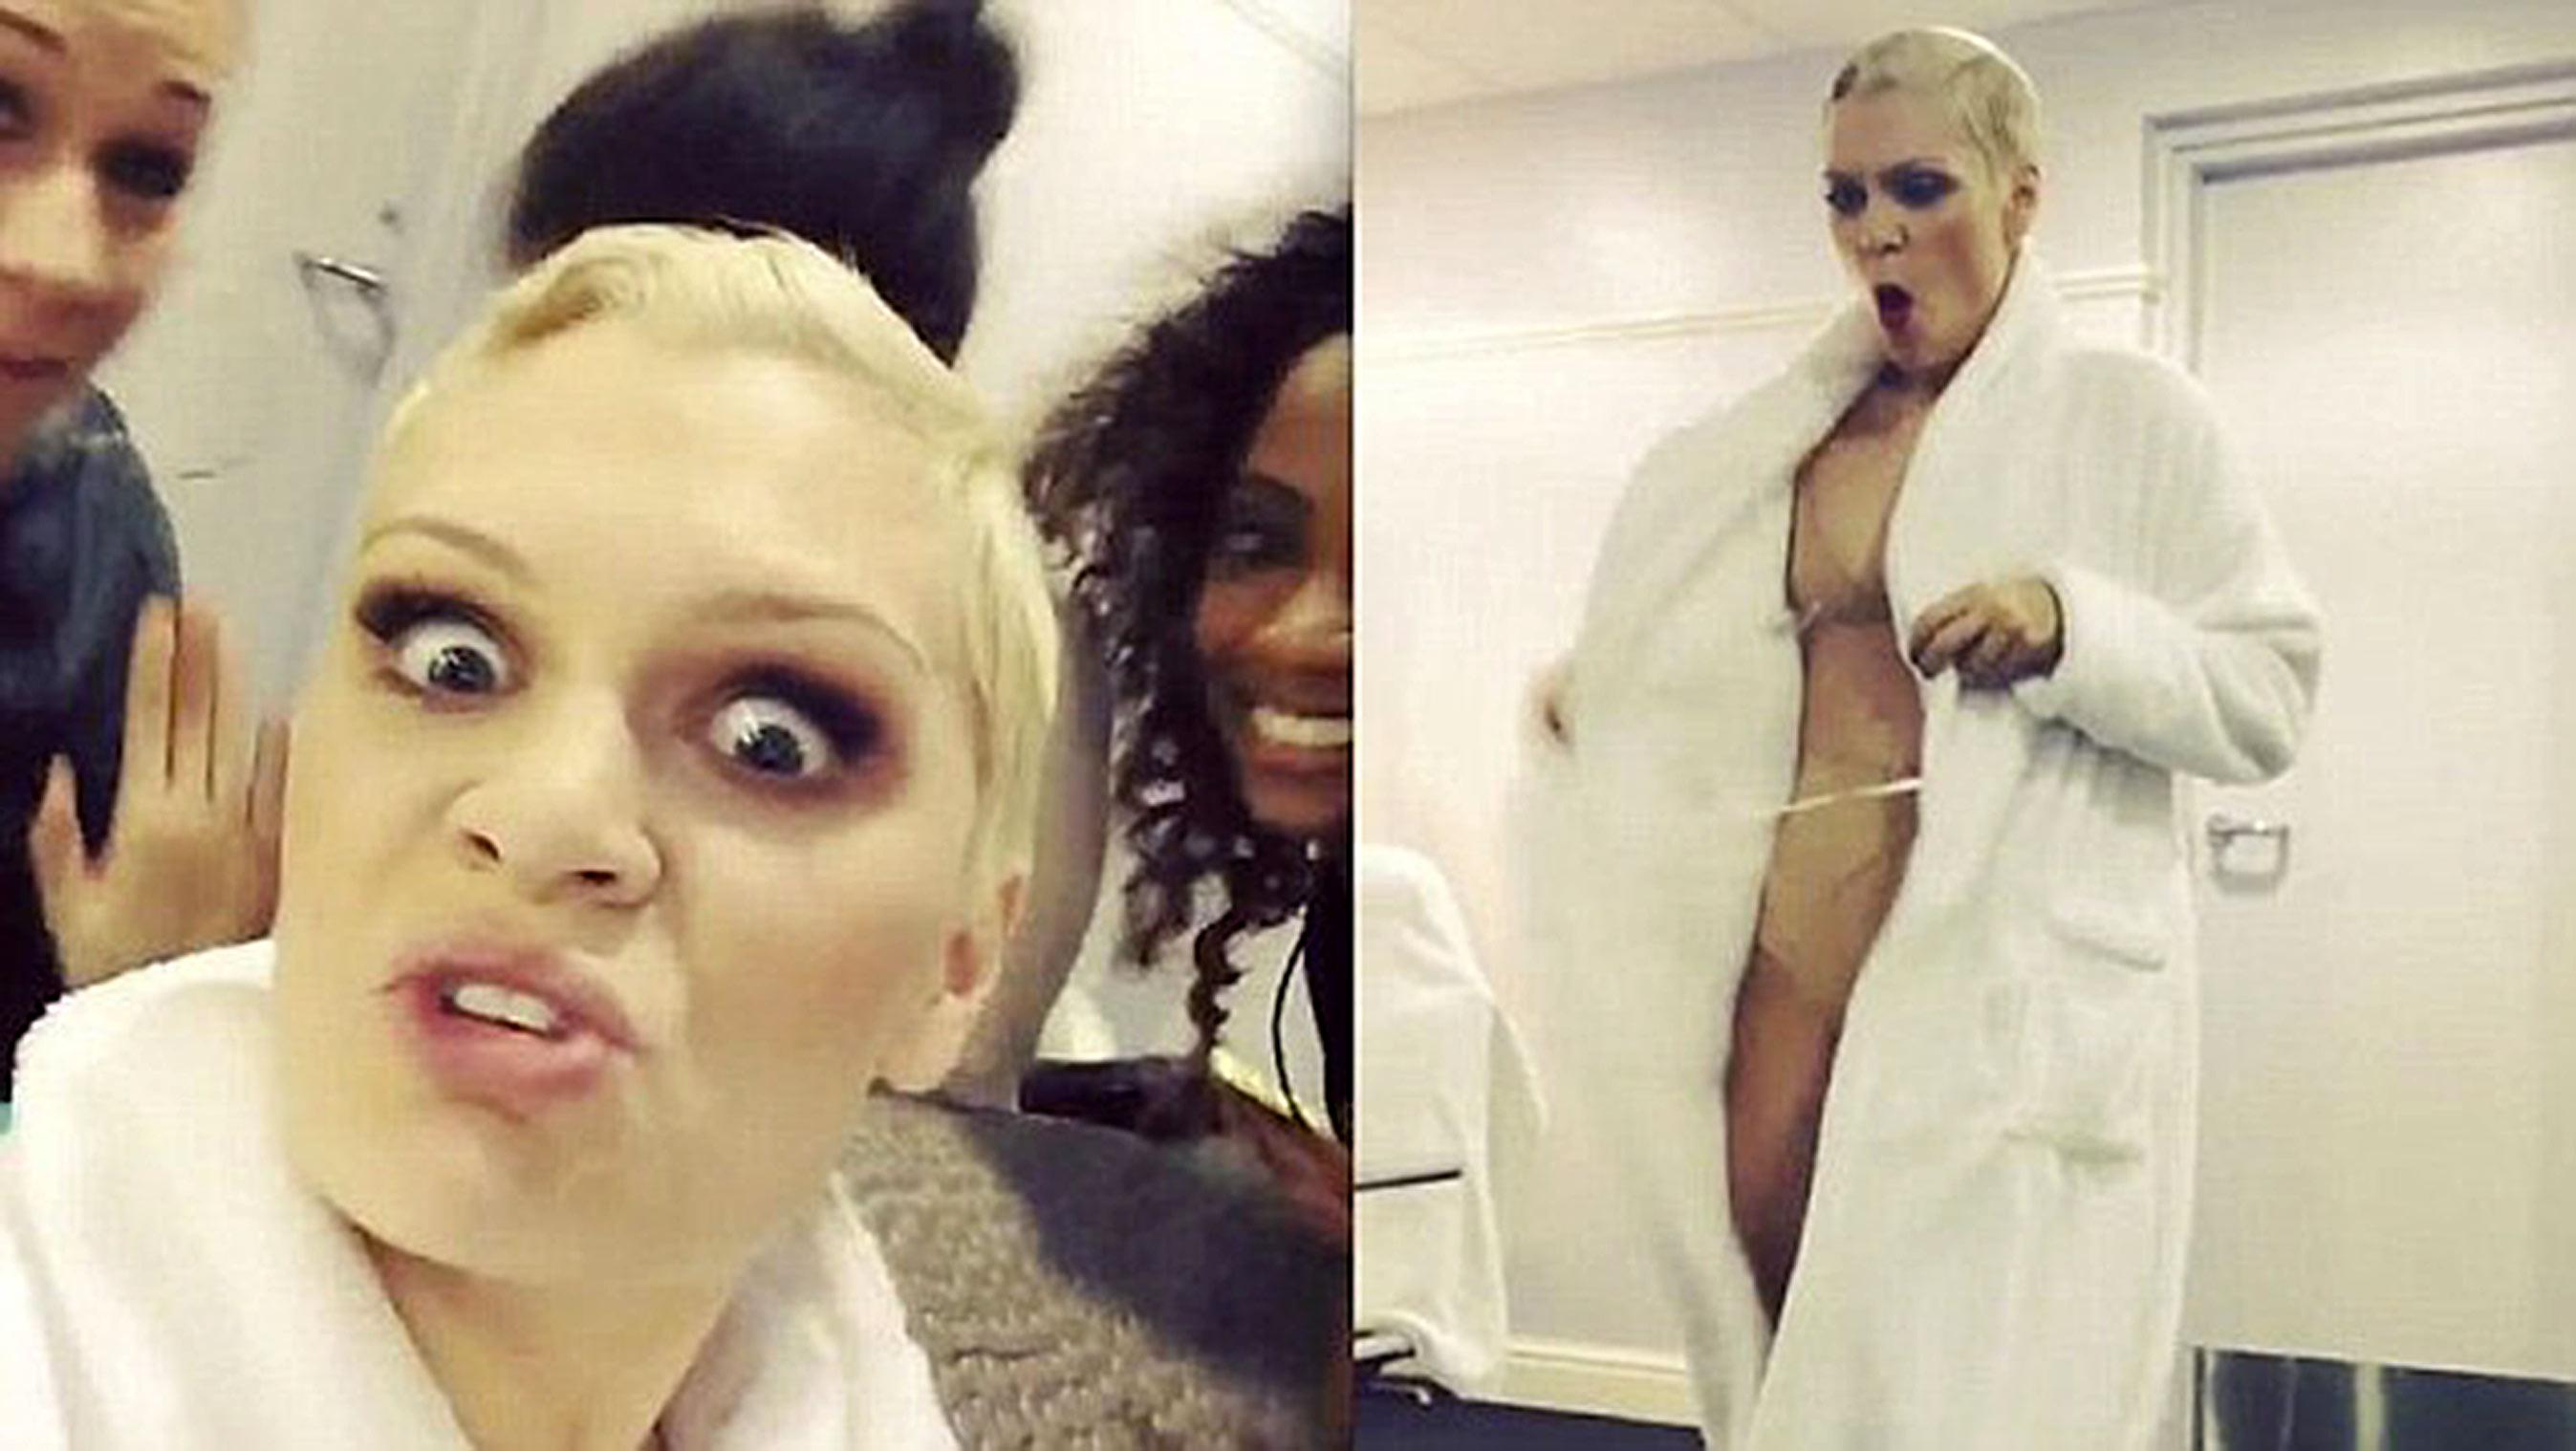 Jessie J Naked Private Pics And Topless For Magazine Scandal Planet